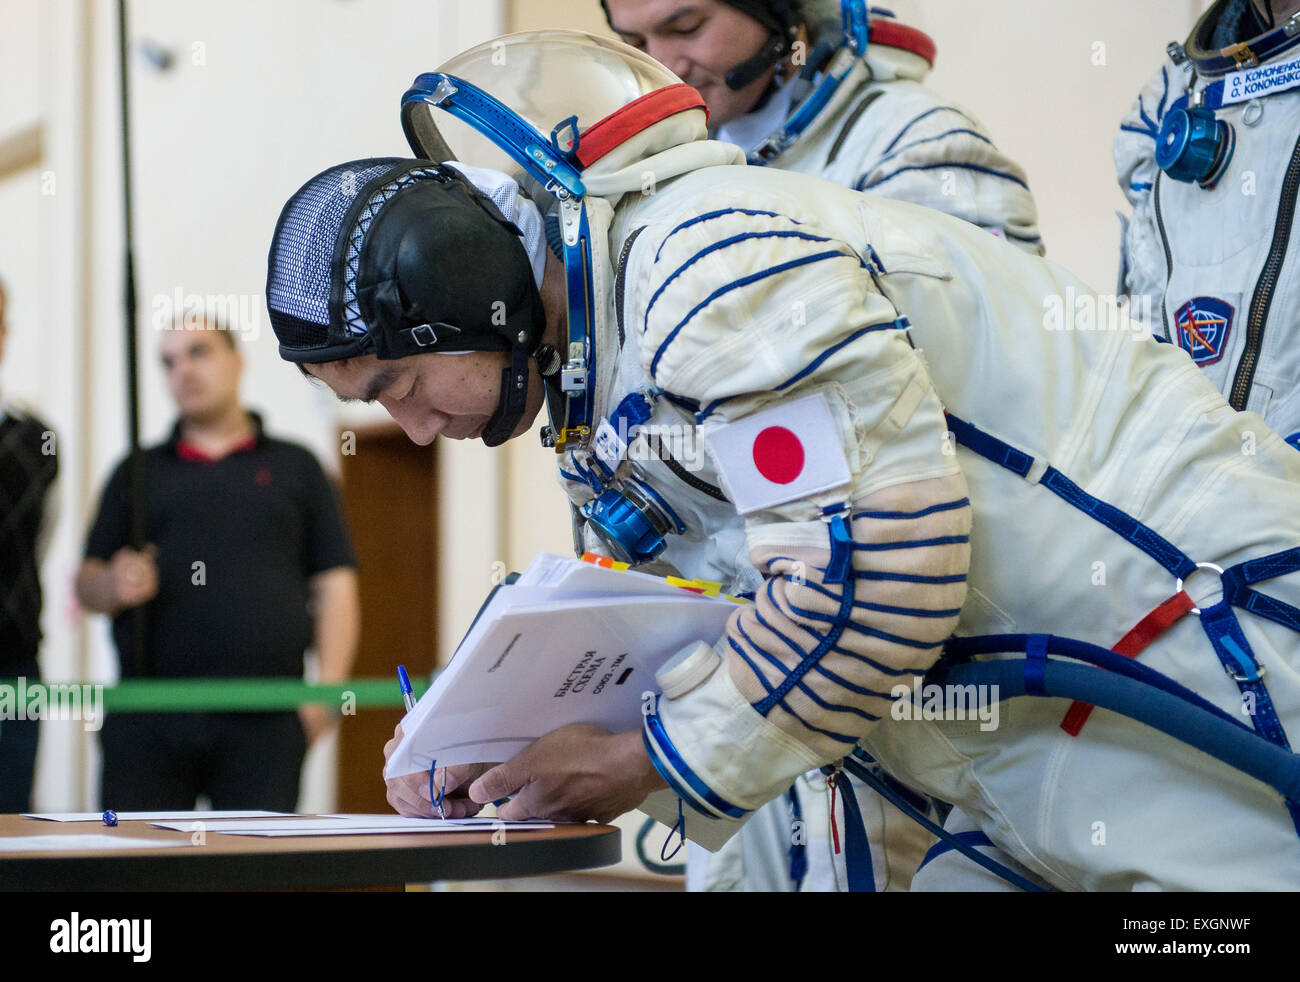 Japan Aerospace Exploration Agency astronaut Kimiya Yui signs documents during the second day of qualification exams with NASA astronaut Kjell Lindgren and Russian cosmonaut Oleg Kononenko, Thursday, May 7, 2015 at the Gagarin Cosmonaut Training Center (GCTC) in Star City, Russia. The Expedition 44/45 trio is preparing for launch to the International Space Station in their Soyuz TMA-17M spacecraft from the Baikonur Cosmodrome in Kazakhstan. Stock Photo